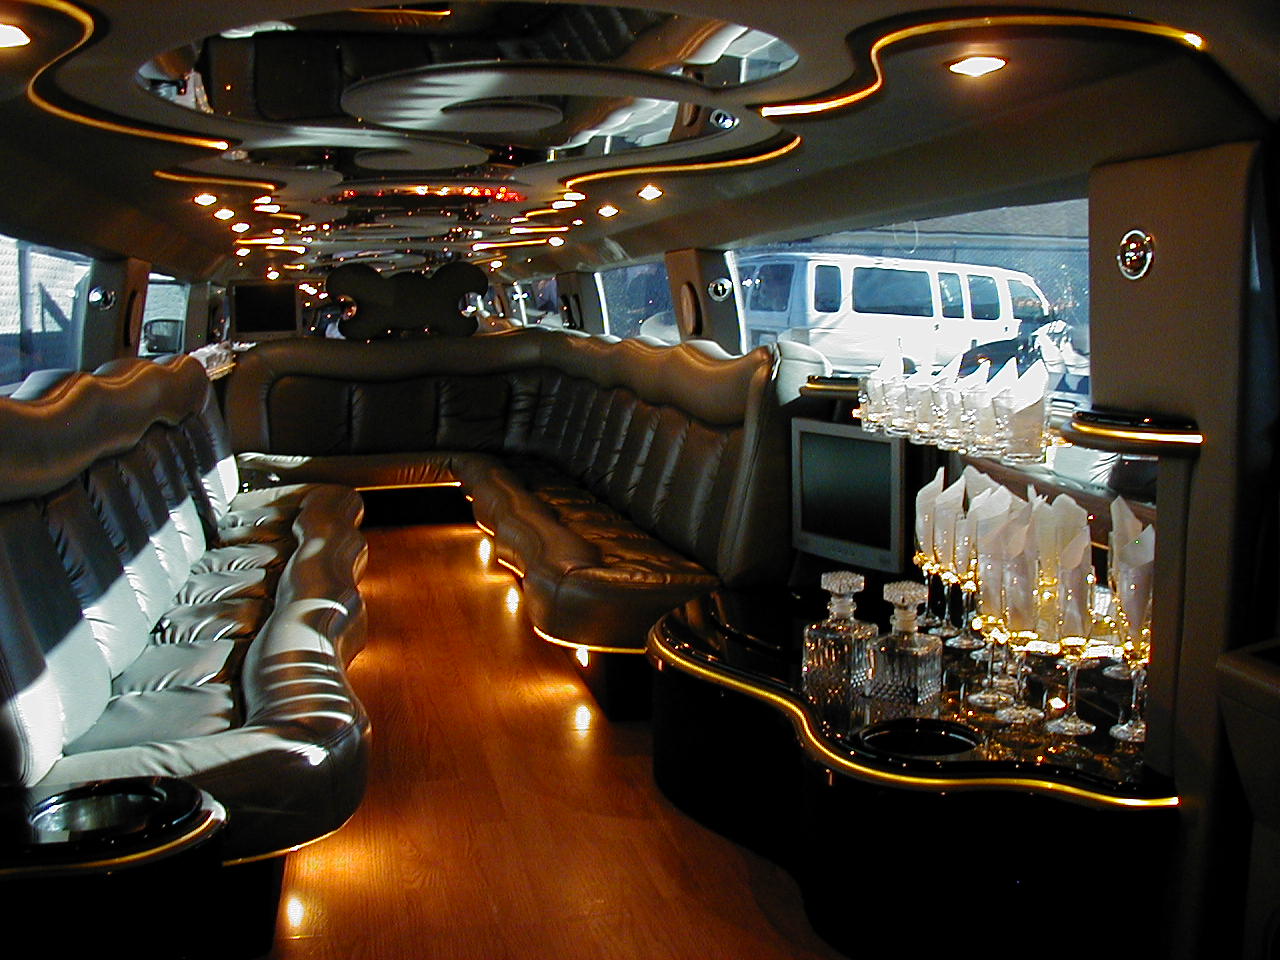 Look at the interior of the hummer h2 limousine